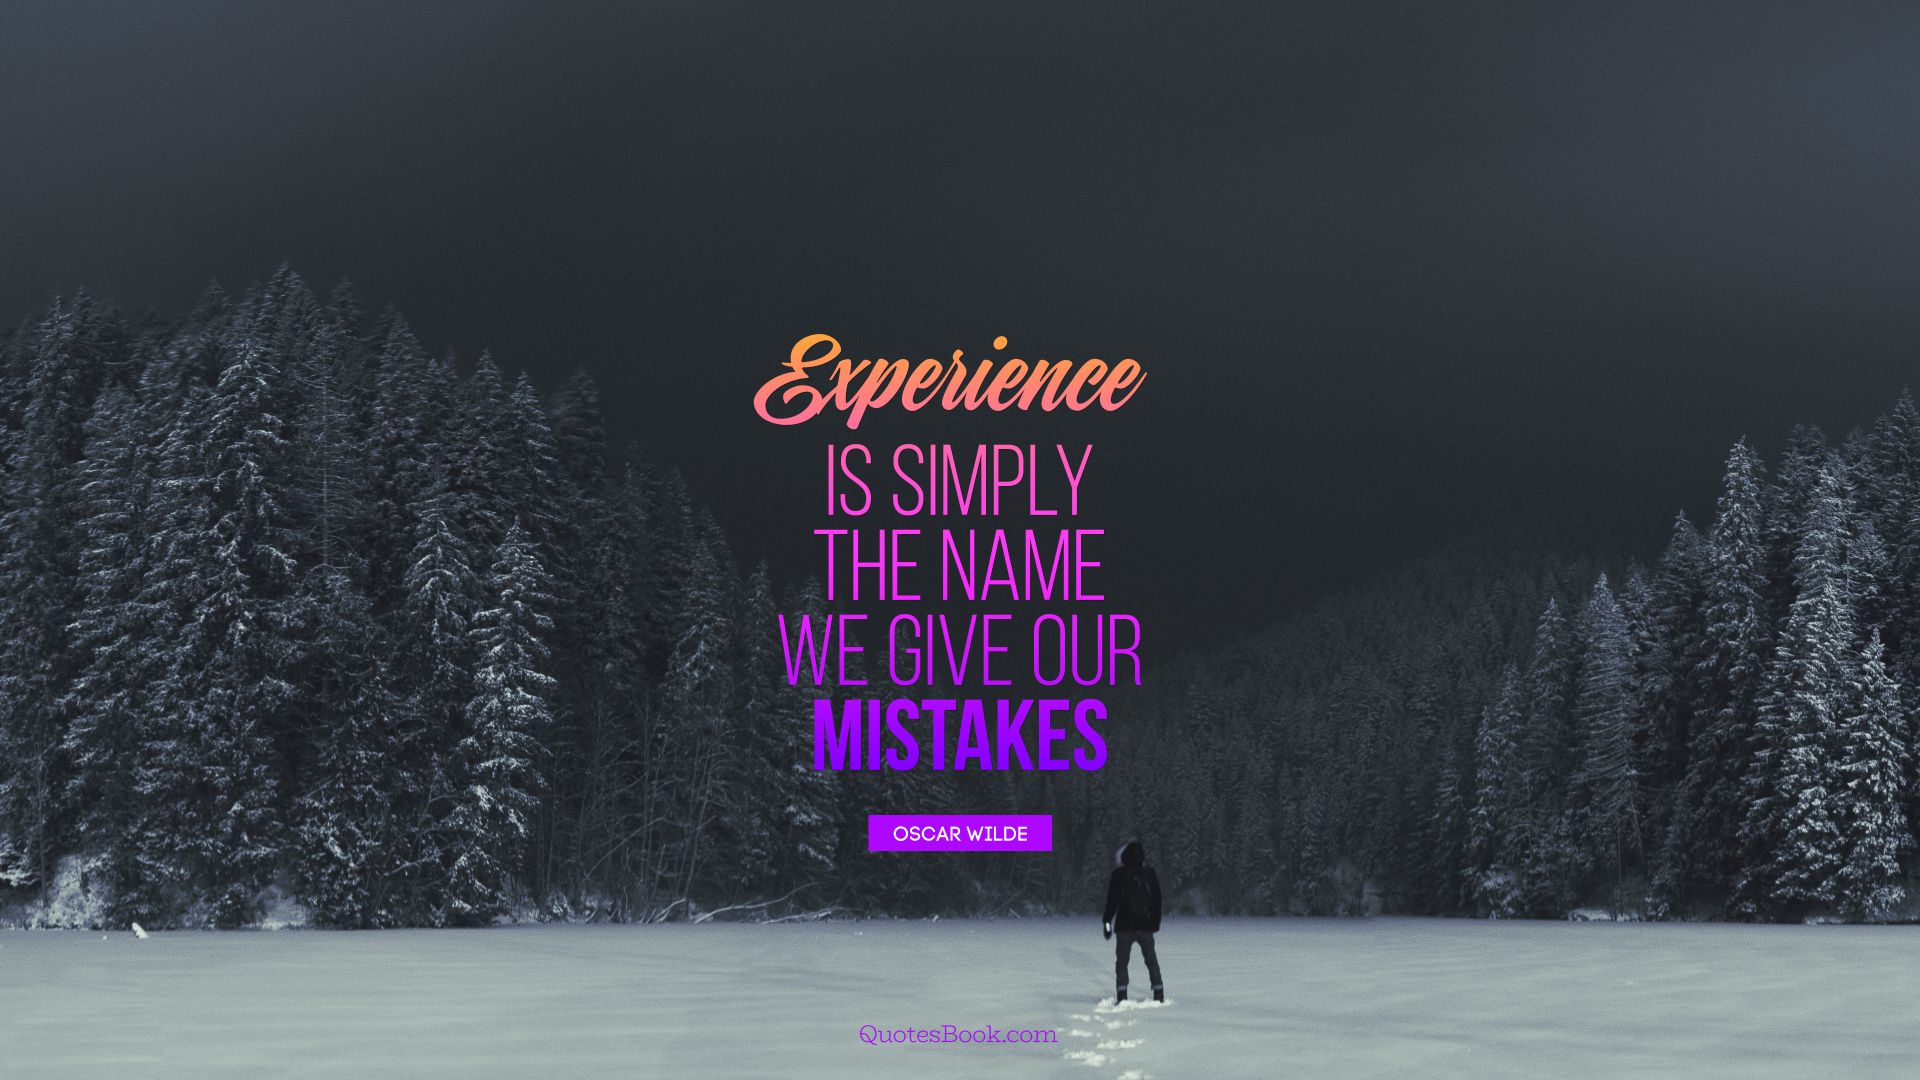 Experience is simply the name we give our mistakes. - Quote by Oscar Wilde